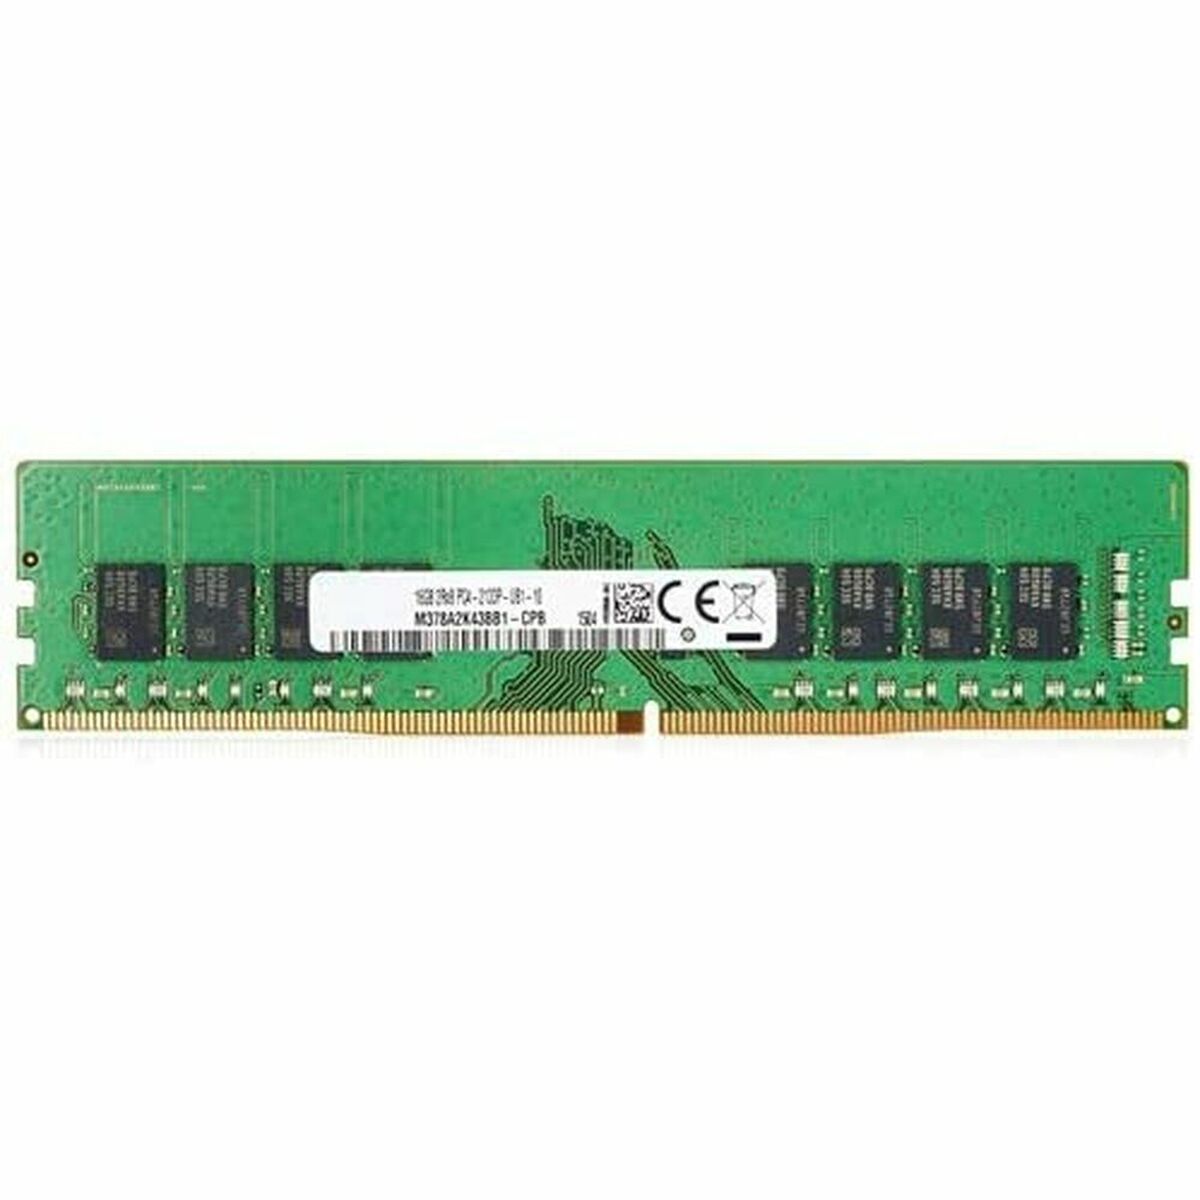 RAM Memory HP 5YZ54AA DDR4 DDR4-SDRAM, HP, Computing, Components, ram-memory-hp-5yz54aa-ddr4-ddr4-sdram, Brand_HP, category-reference-2609, category-reference-2803, category-reference-2807, category-reference-t-19685, category-reference-t-19912, category-reference-t-21360, computers / components, Condition_NEW, Price_300 - 400, Teleworking, RiotNook